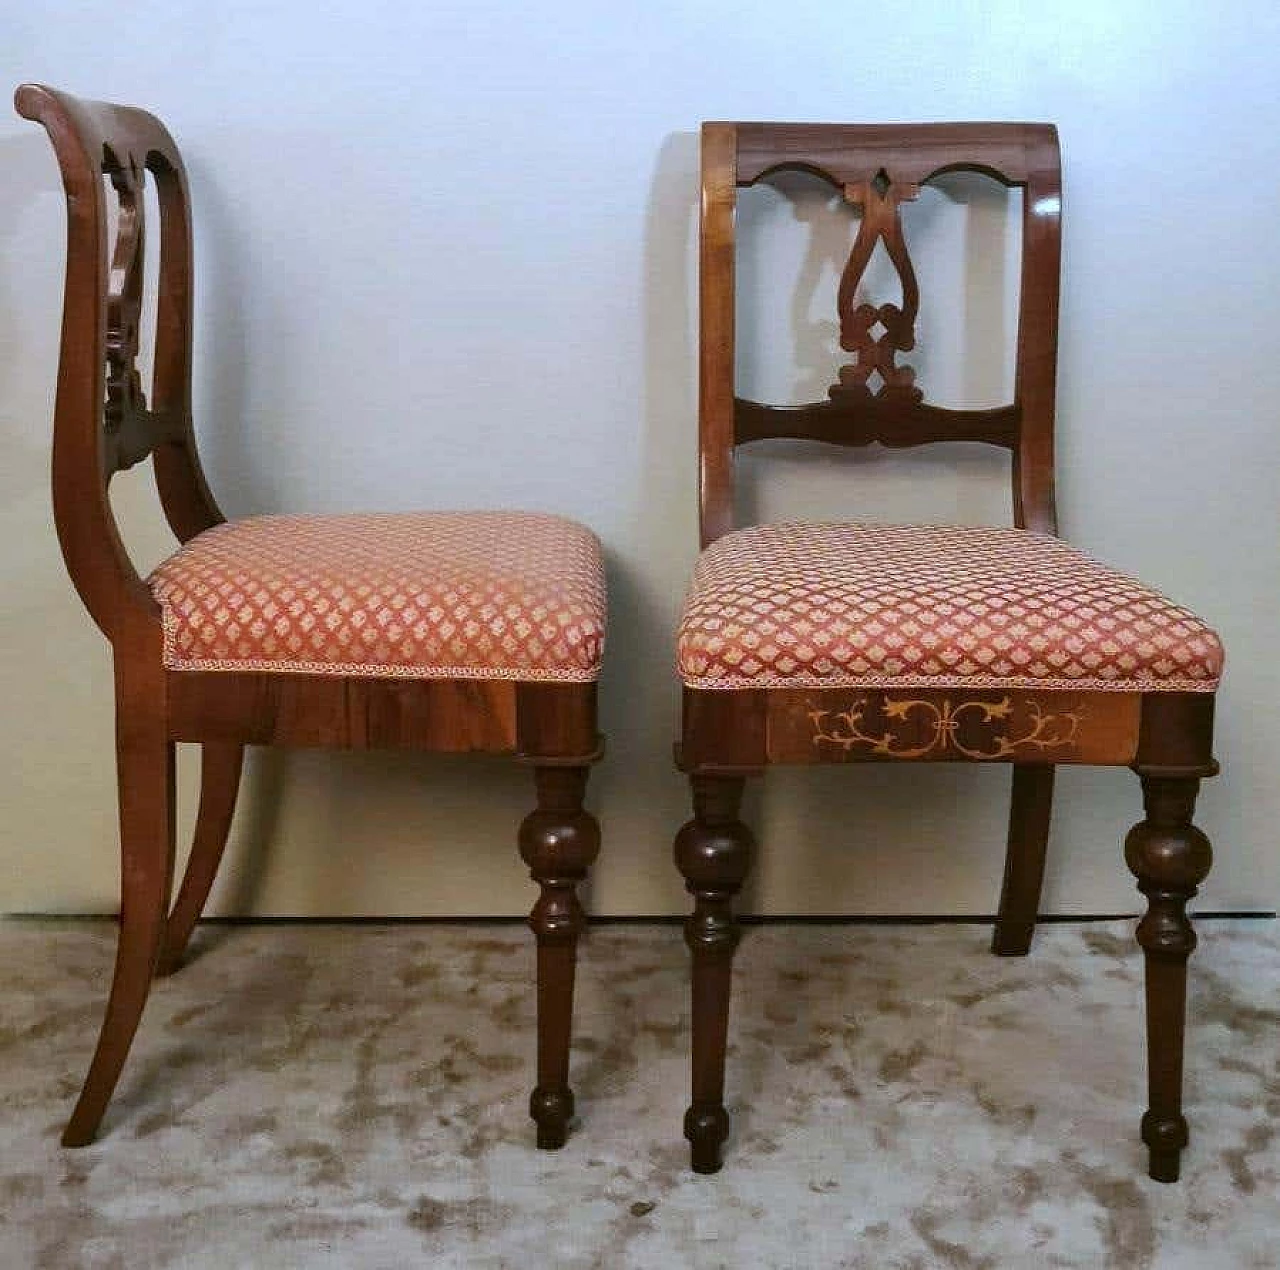 4 Biedermeier style wooden and fabric chairs, mid-19th century 8